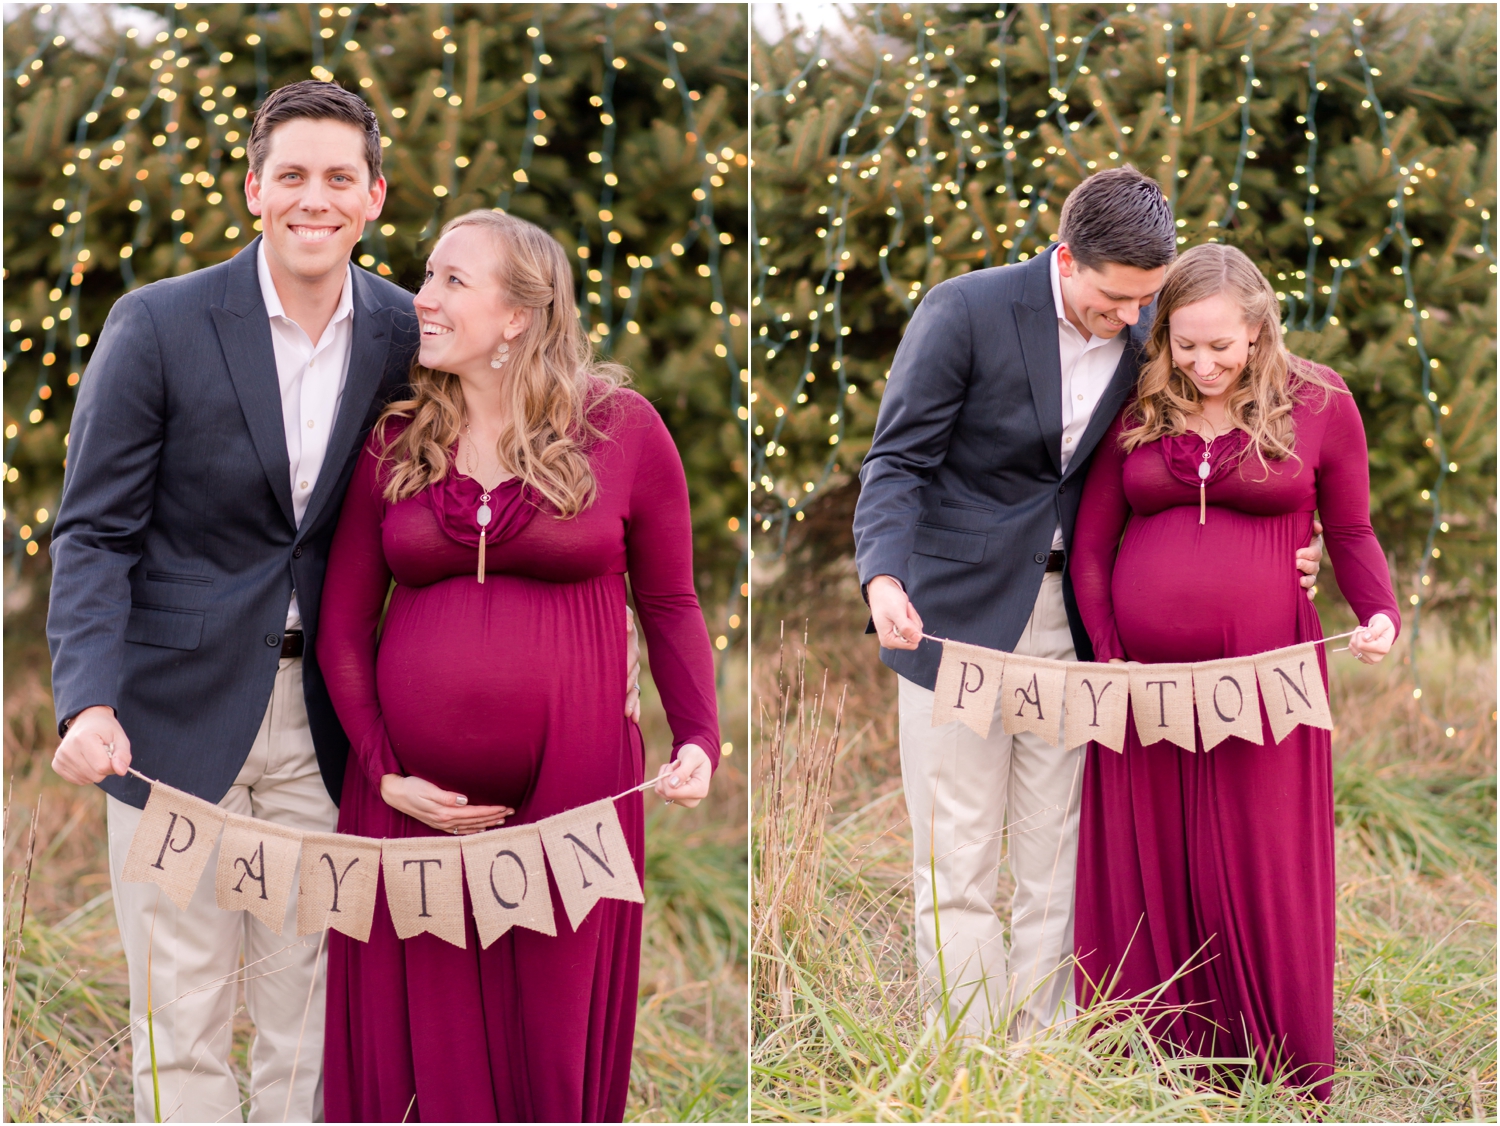 AG and Kevin Maternity-427_anna grace photography baltimore maryland maternity photographer cromwell valley park photo.jpg